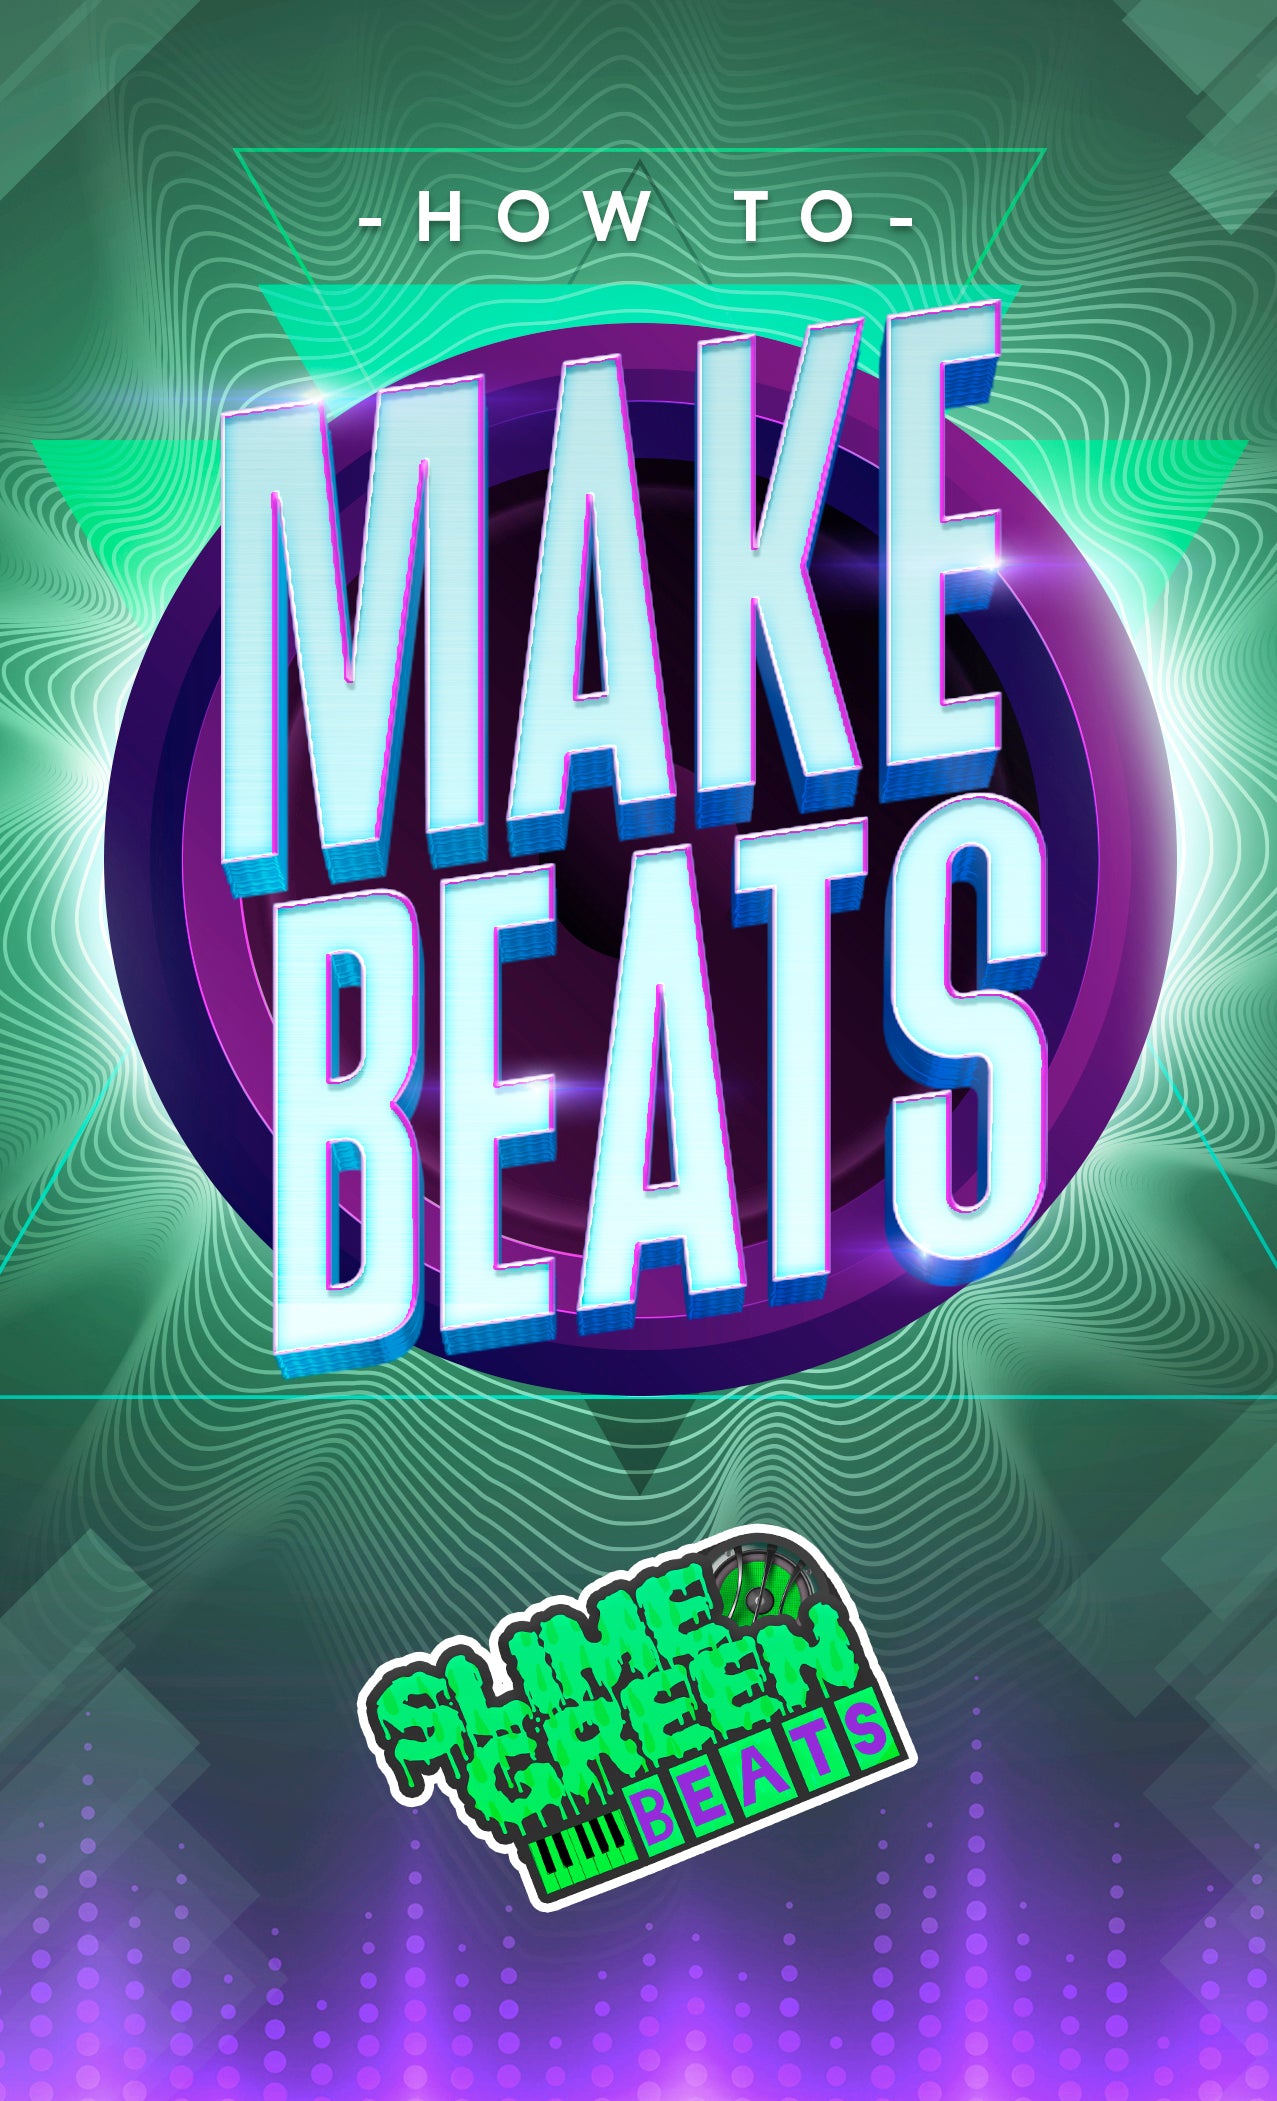 How to make beats book cover